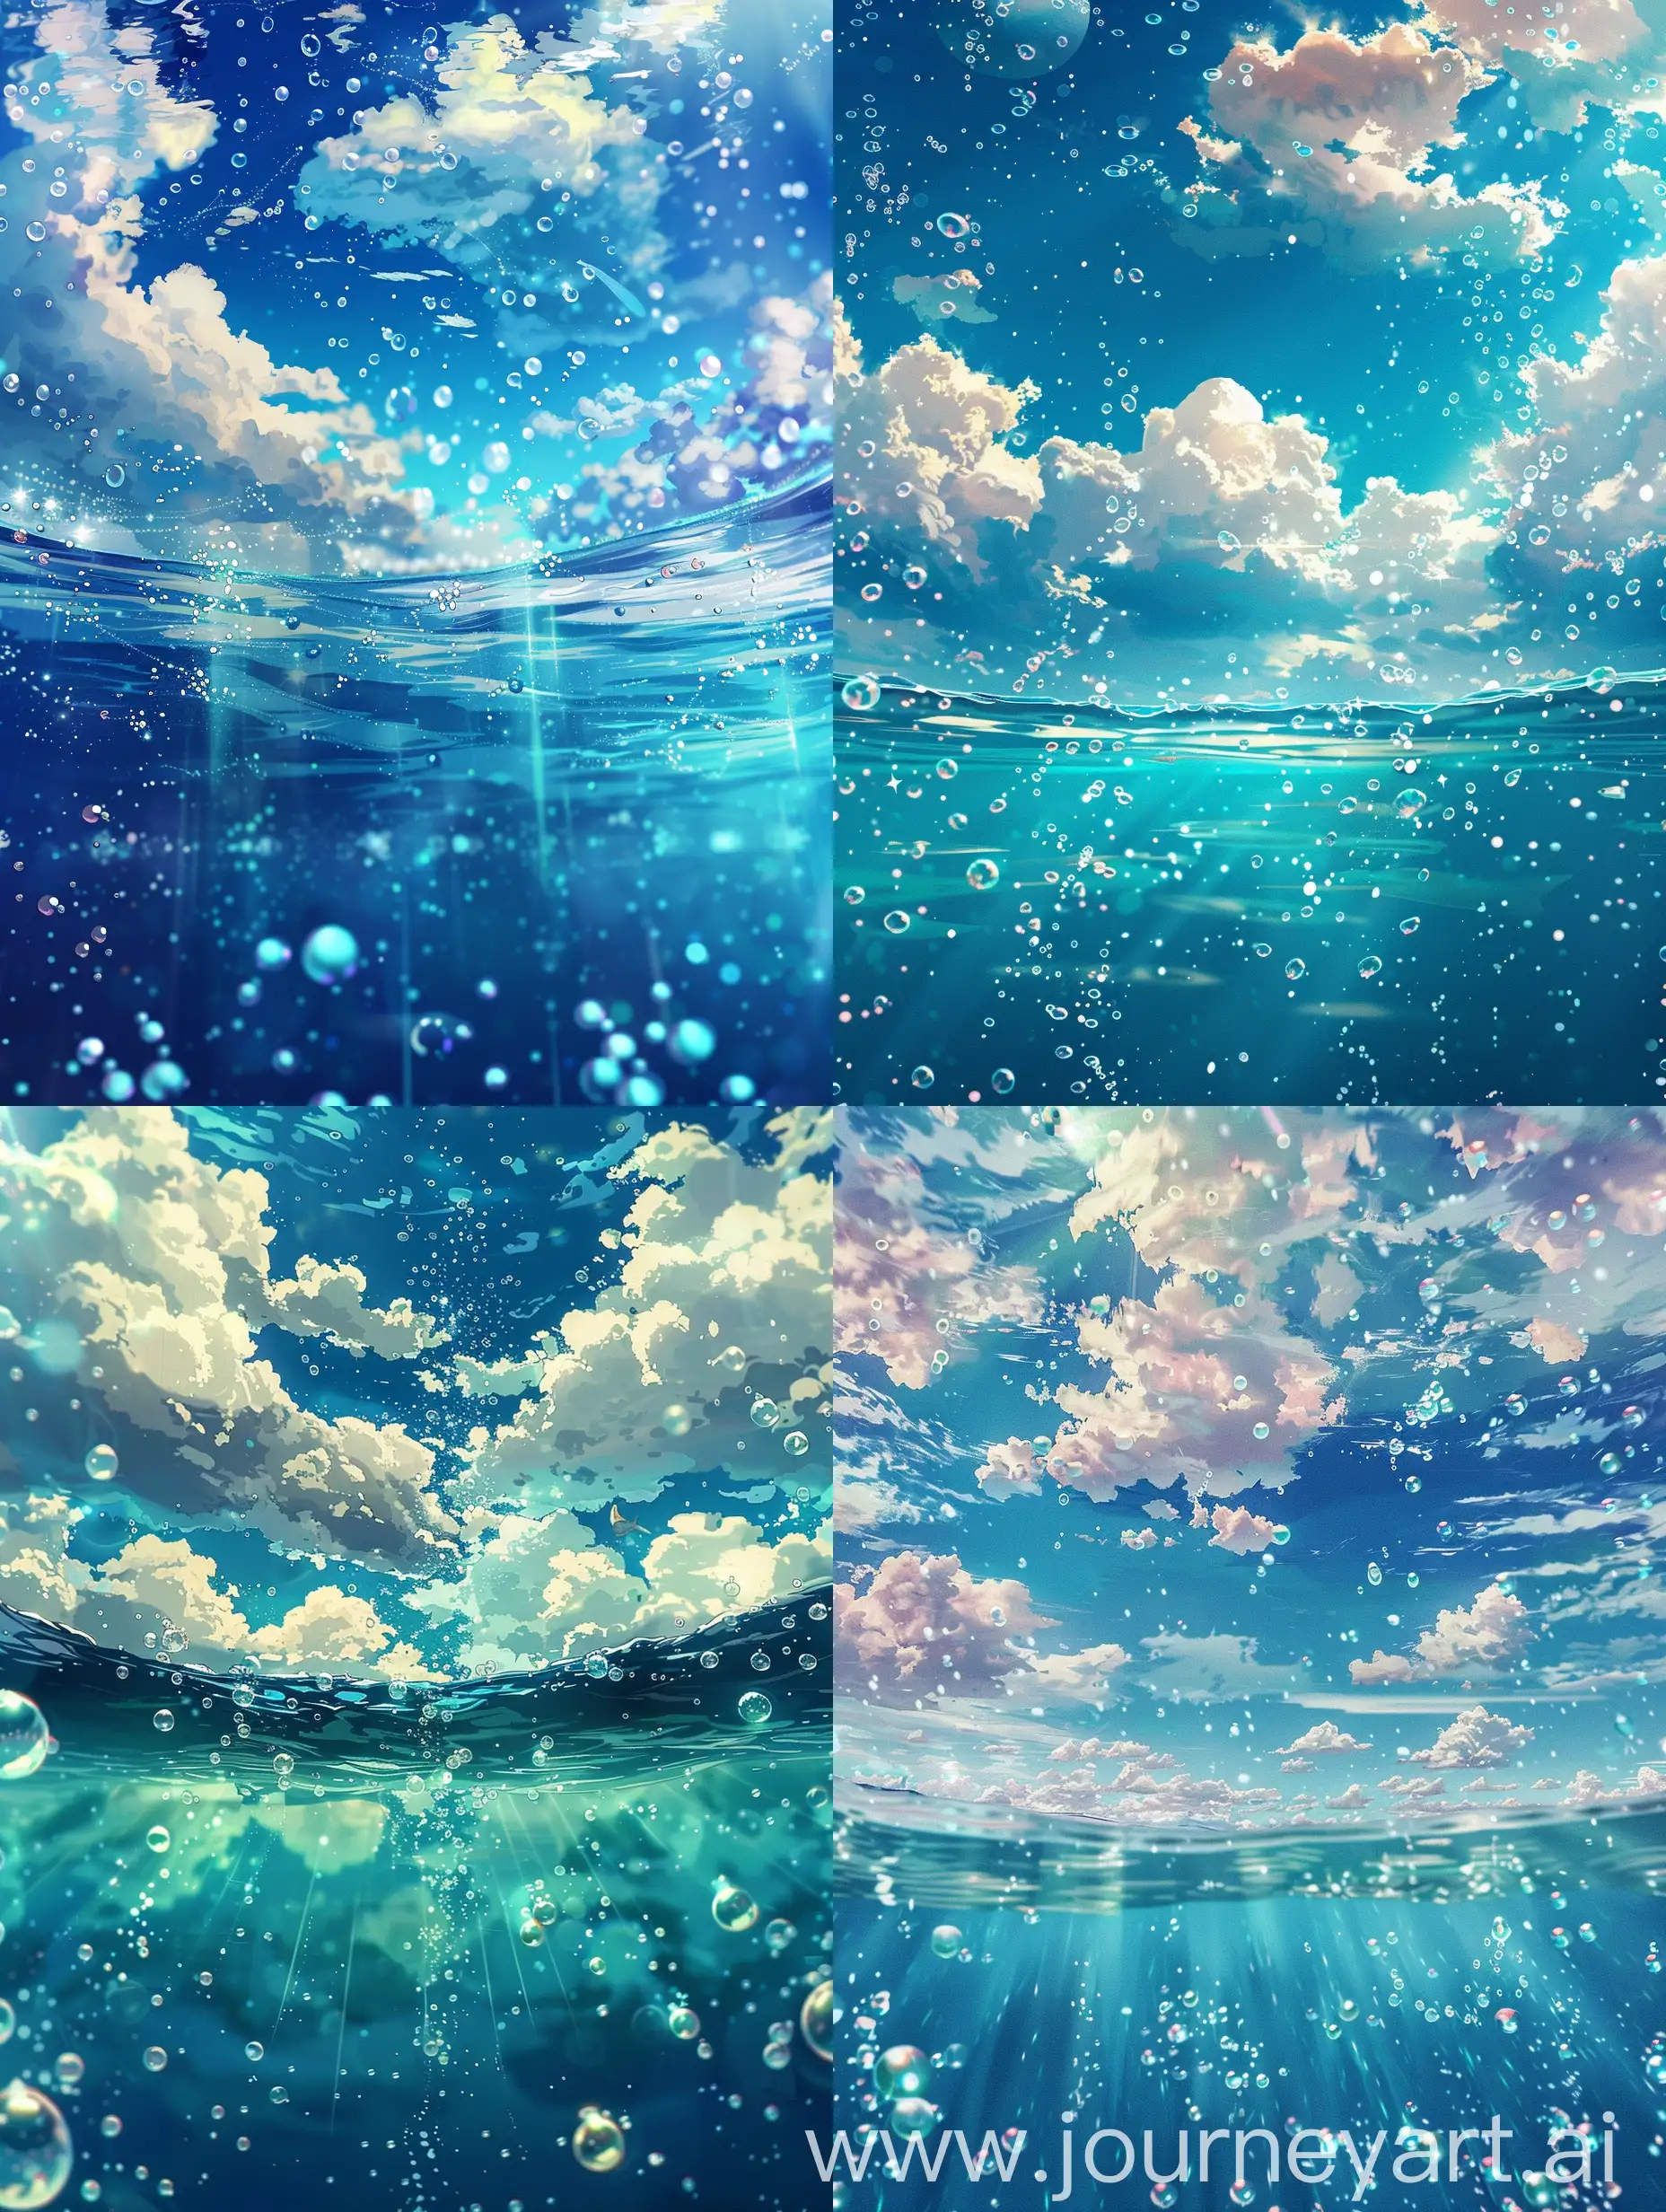 Anime style,Beautifully illustrated,aesthetic,beautiful vibes,makato shinkai style, under water view beautiful,sprinkles,beautiful water,underwater scene that blurs the line between water and sky, thanks to the reflection of clouds on the ocean’s surface.  and the entire scene is dotted with bubbles, enhancing the mystical feel. Above the water tranquil environment. This image, with its blend of air and water elements, exudes a serene and otherworldly charm.